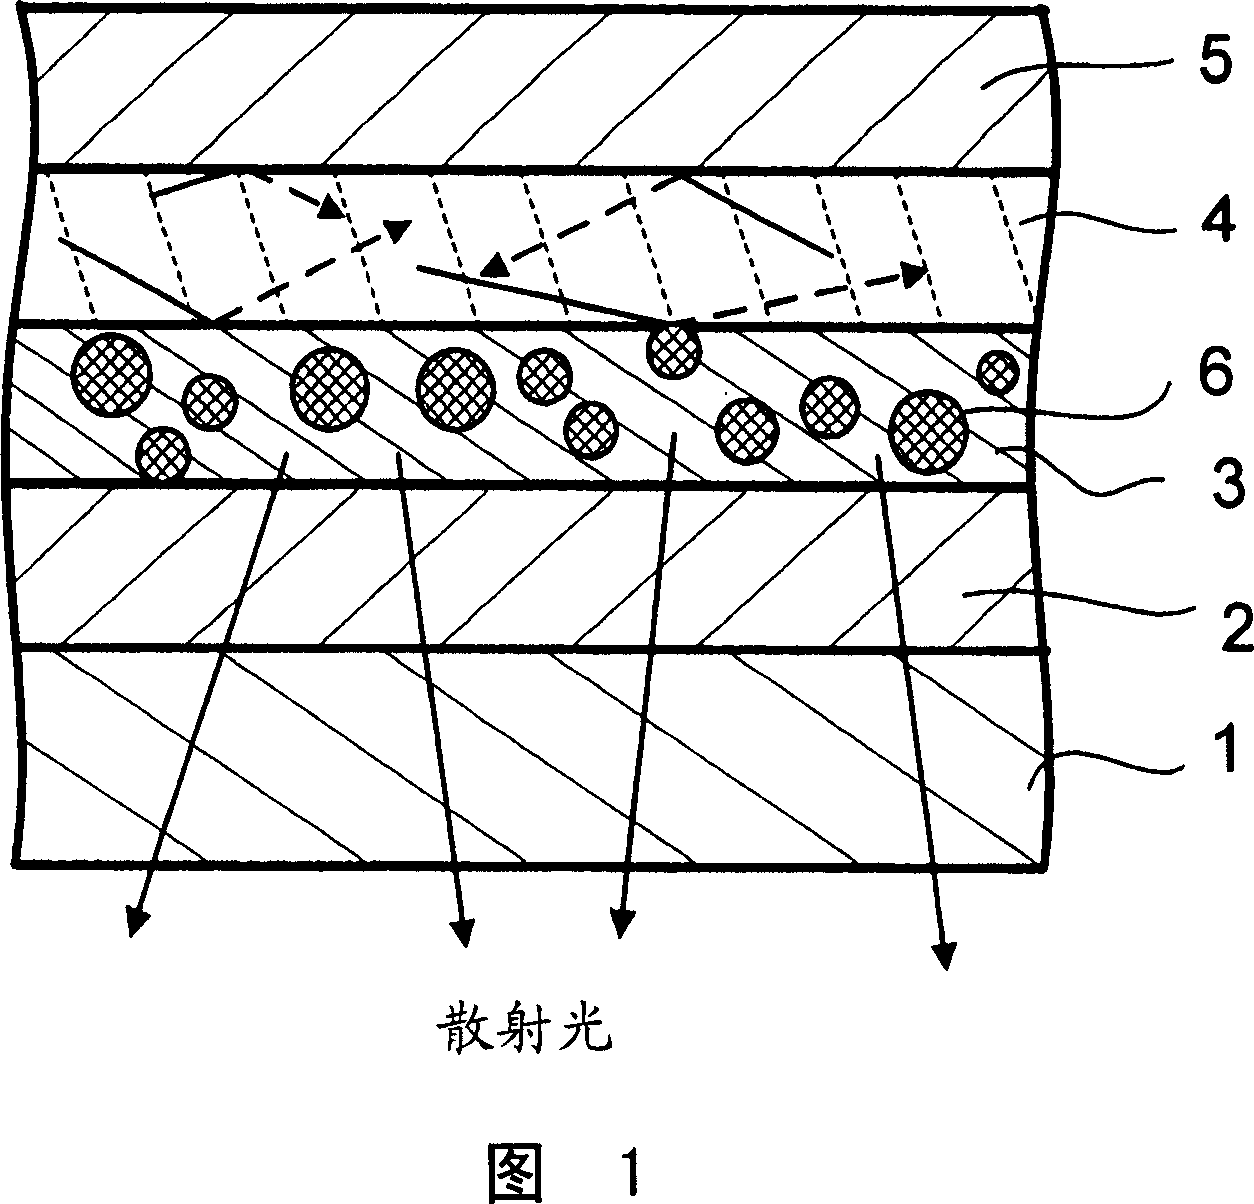 Electroluminescence element and display device using the same